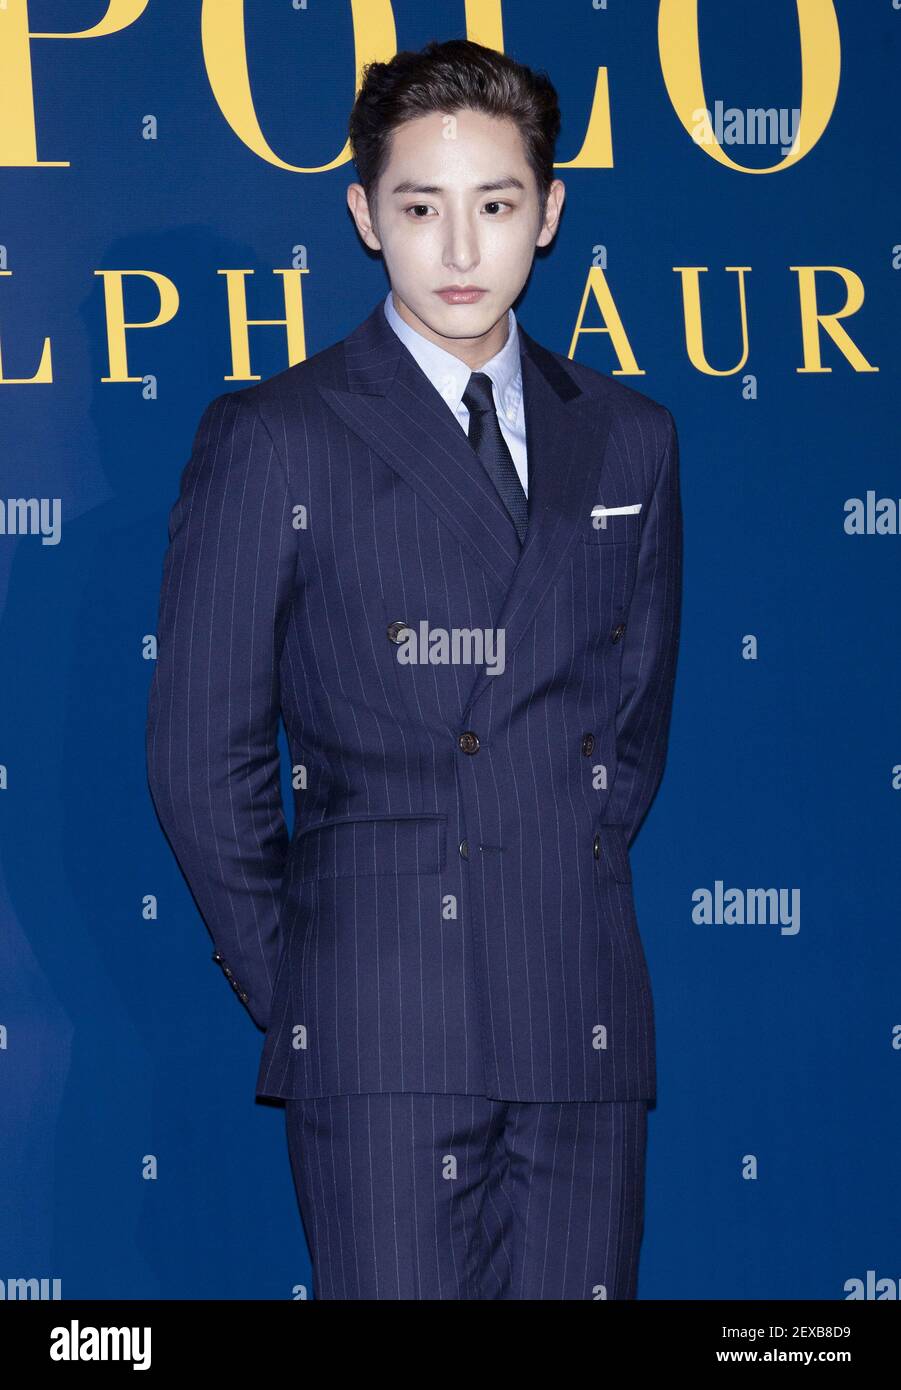 22 September 2015 - Seoul, South Korea : South Korean actor Lee Soo-hyuk,  attends a photo call for the Ralph Lauren fashion brand 'POLO' free  standing store opening ceremony in Seoul, South